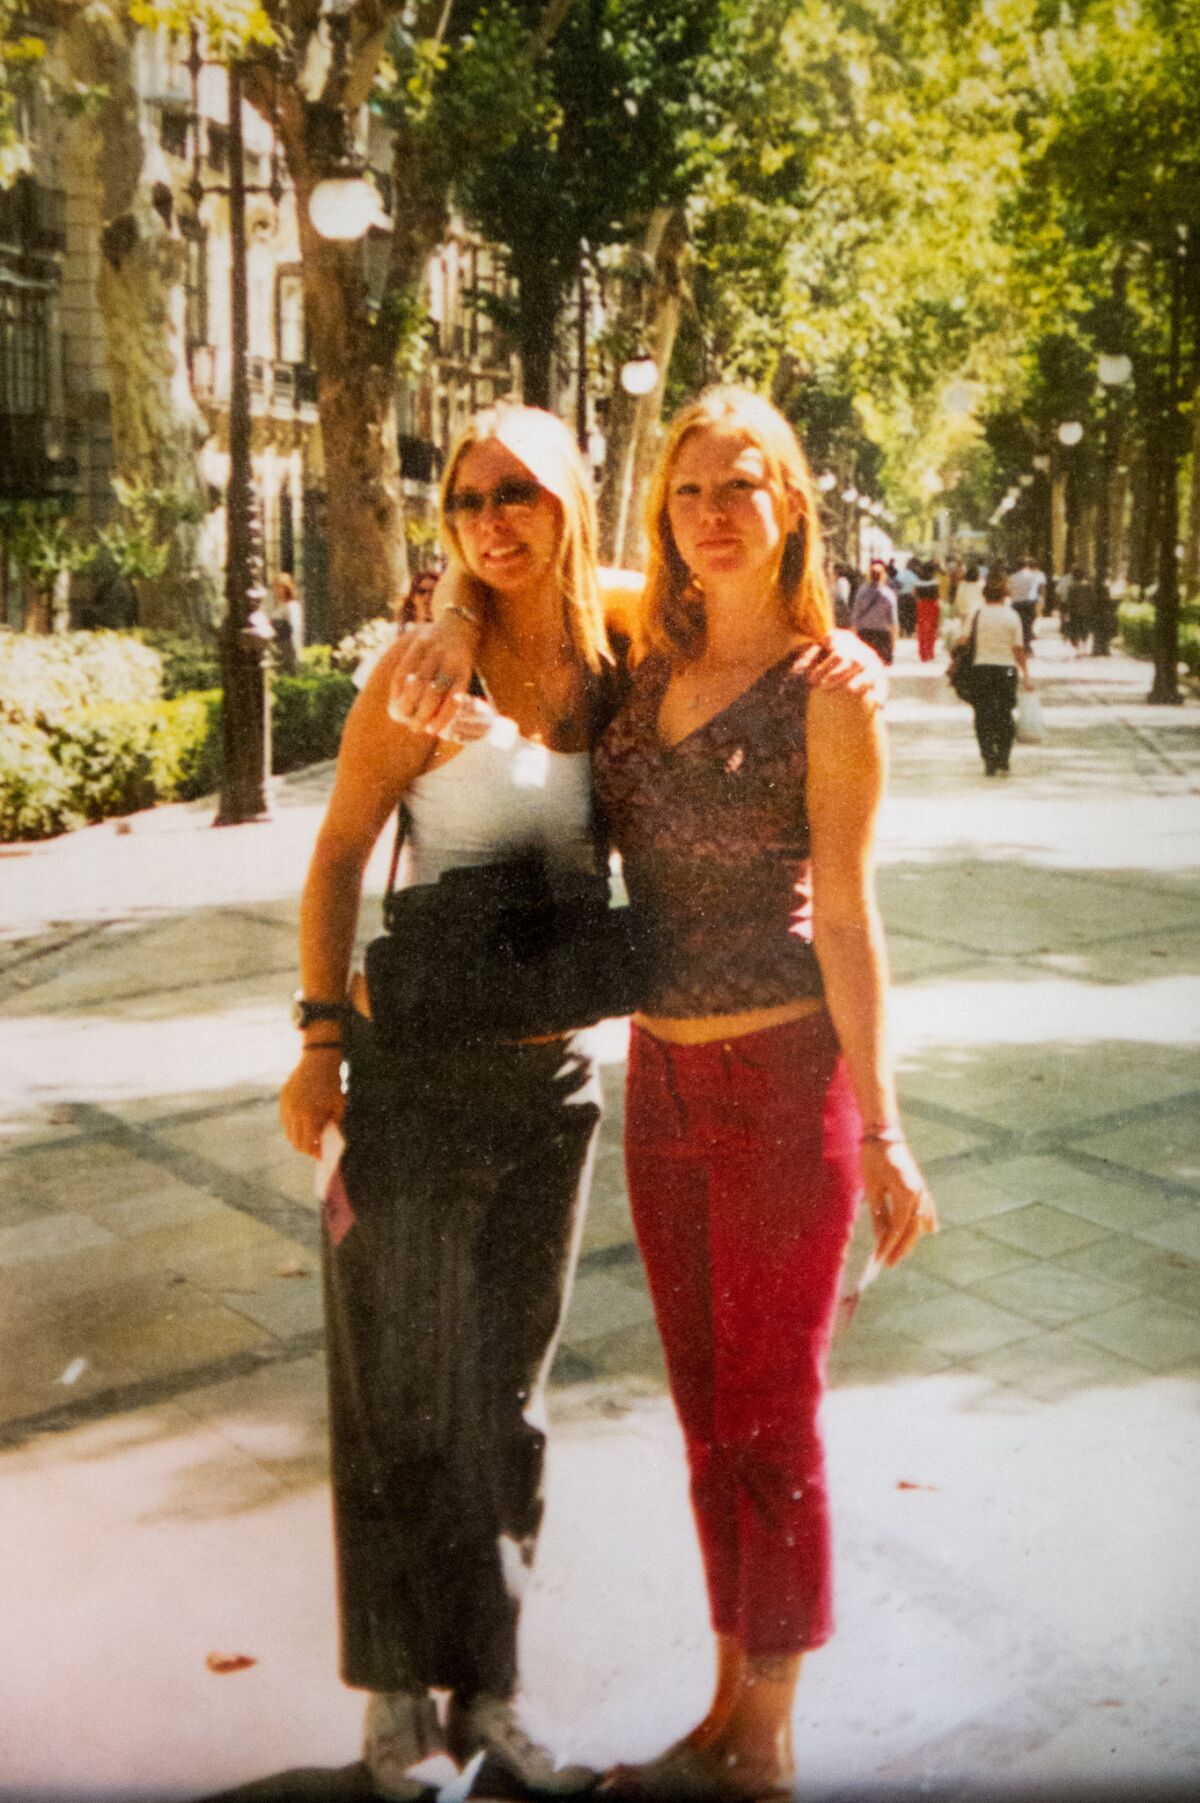 Jackie Houck, left, and her sister Raechel. They were killed in 2004 when they lost control of their rental car and it swerved into a truck.